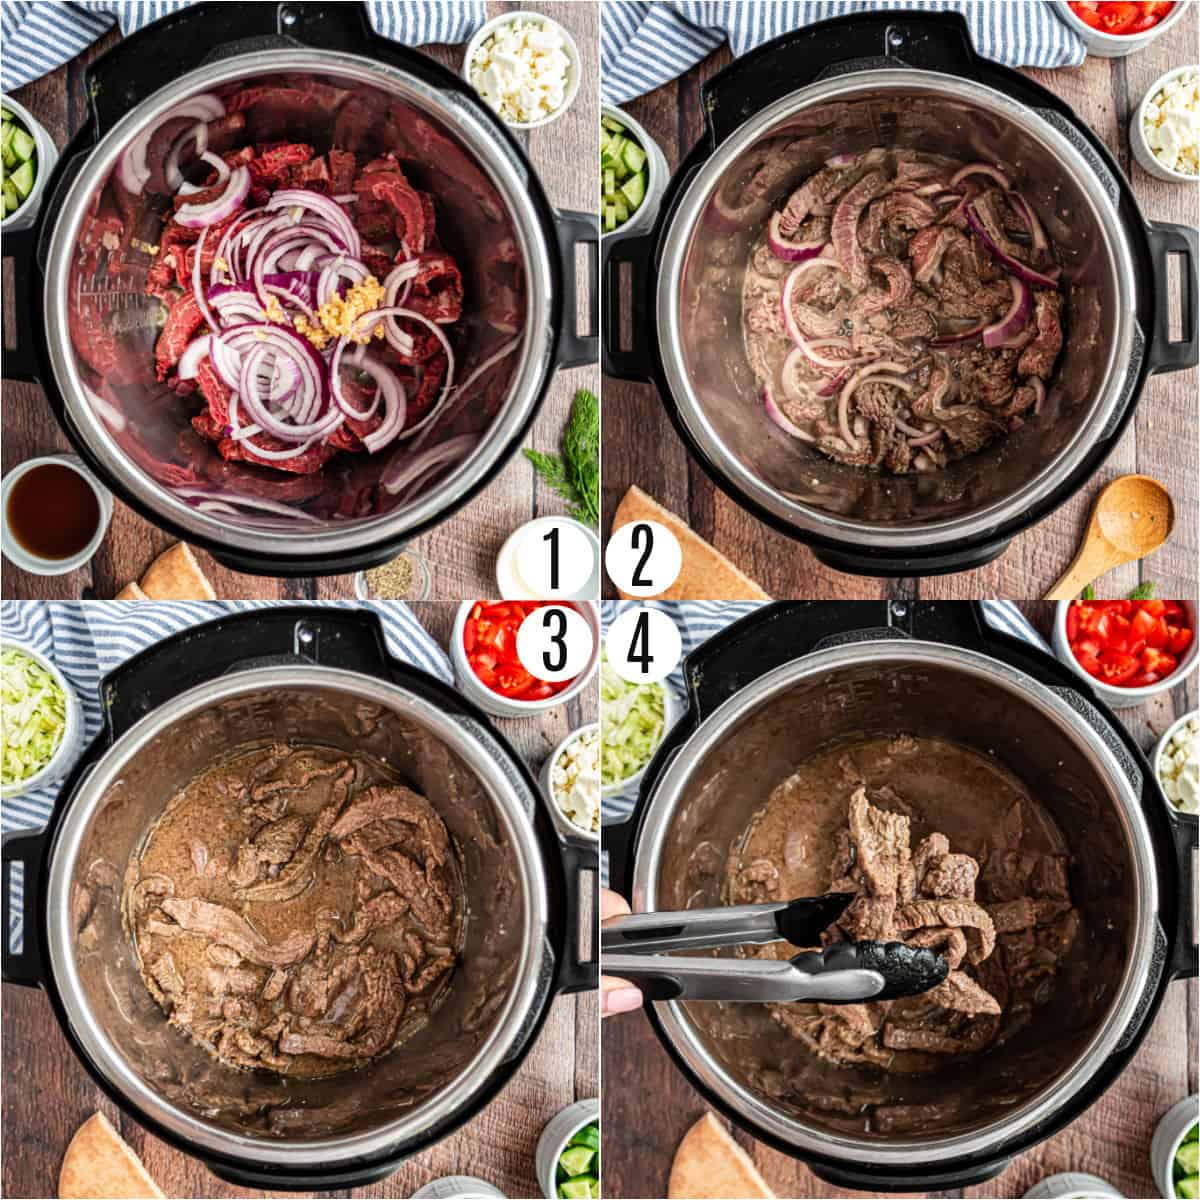 Step by step photos showing how to make beef gyros in instant pot.